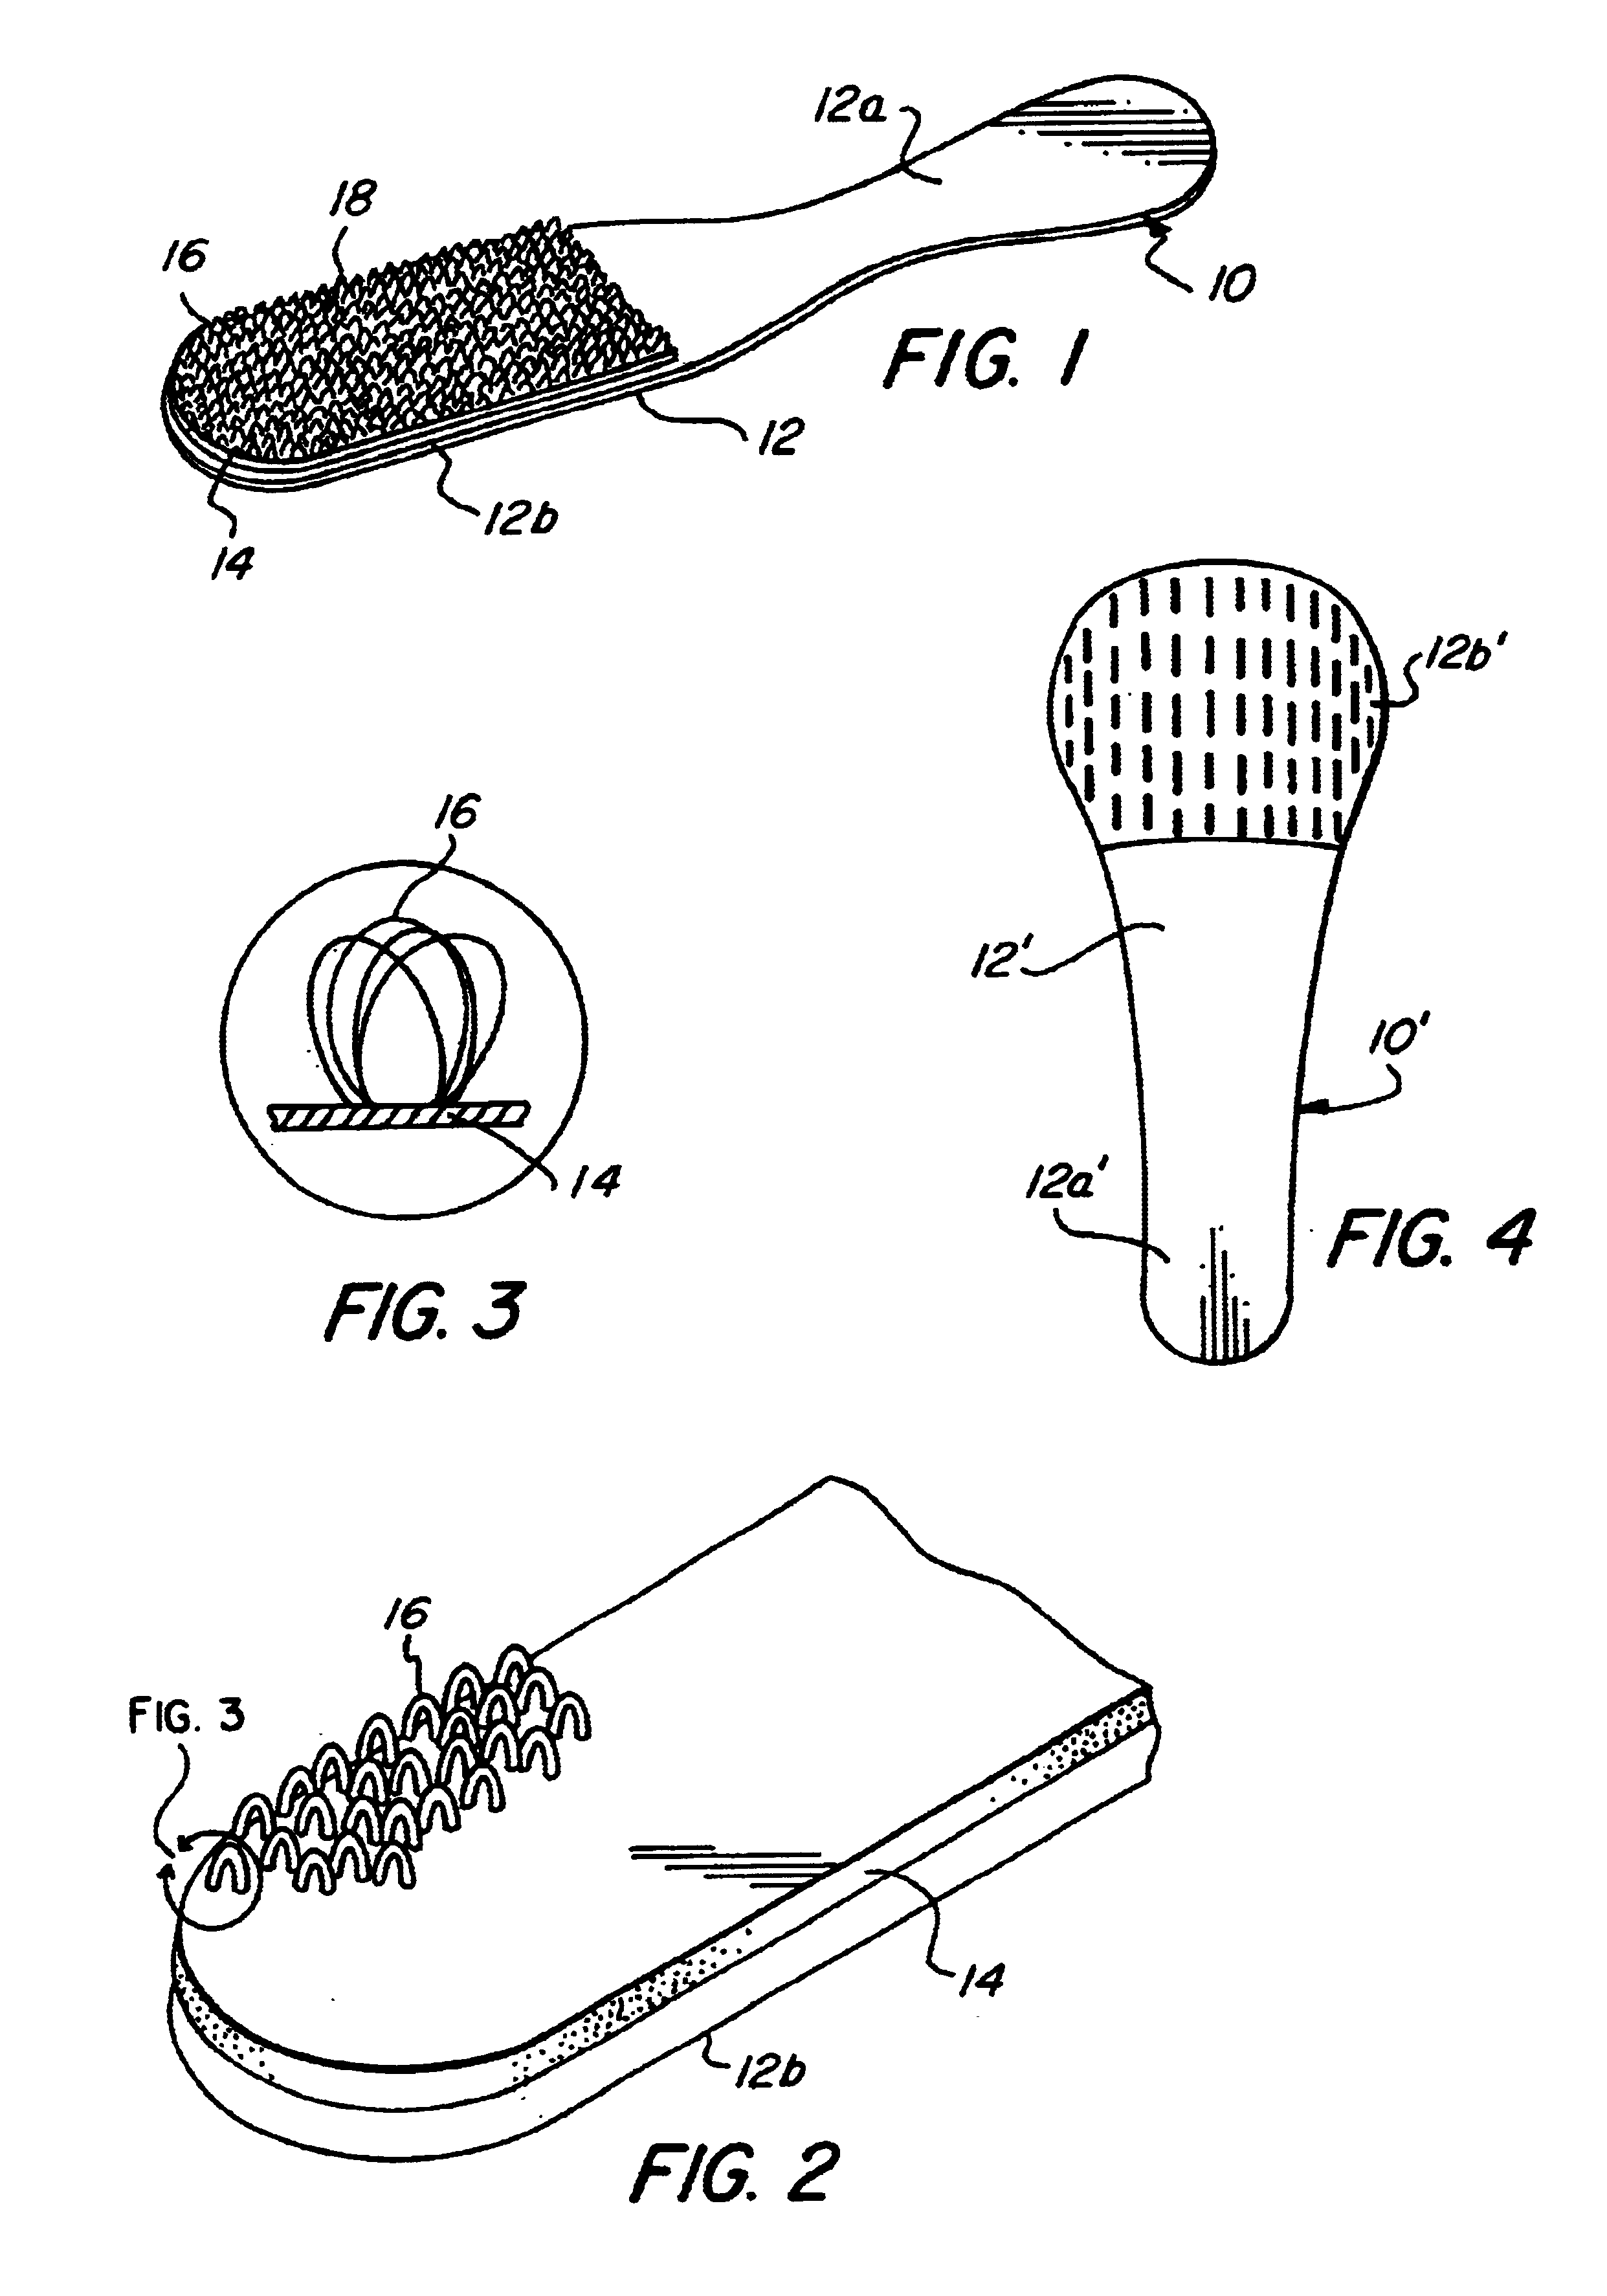 Tongue cleaning device